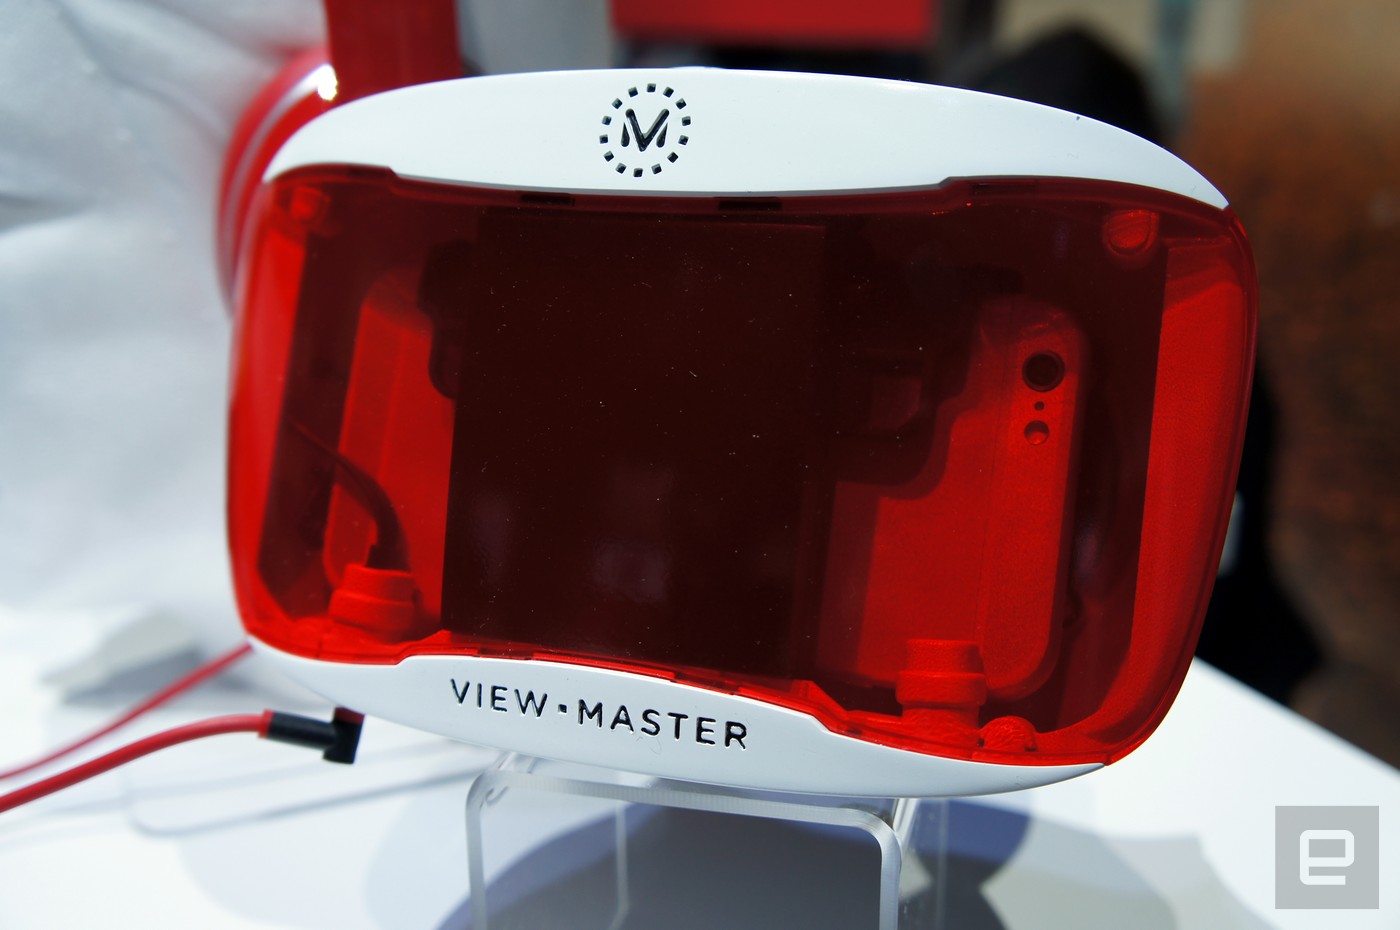 View-Master VR keeps one foot planted in the real world